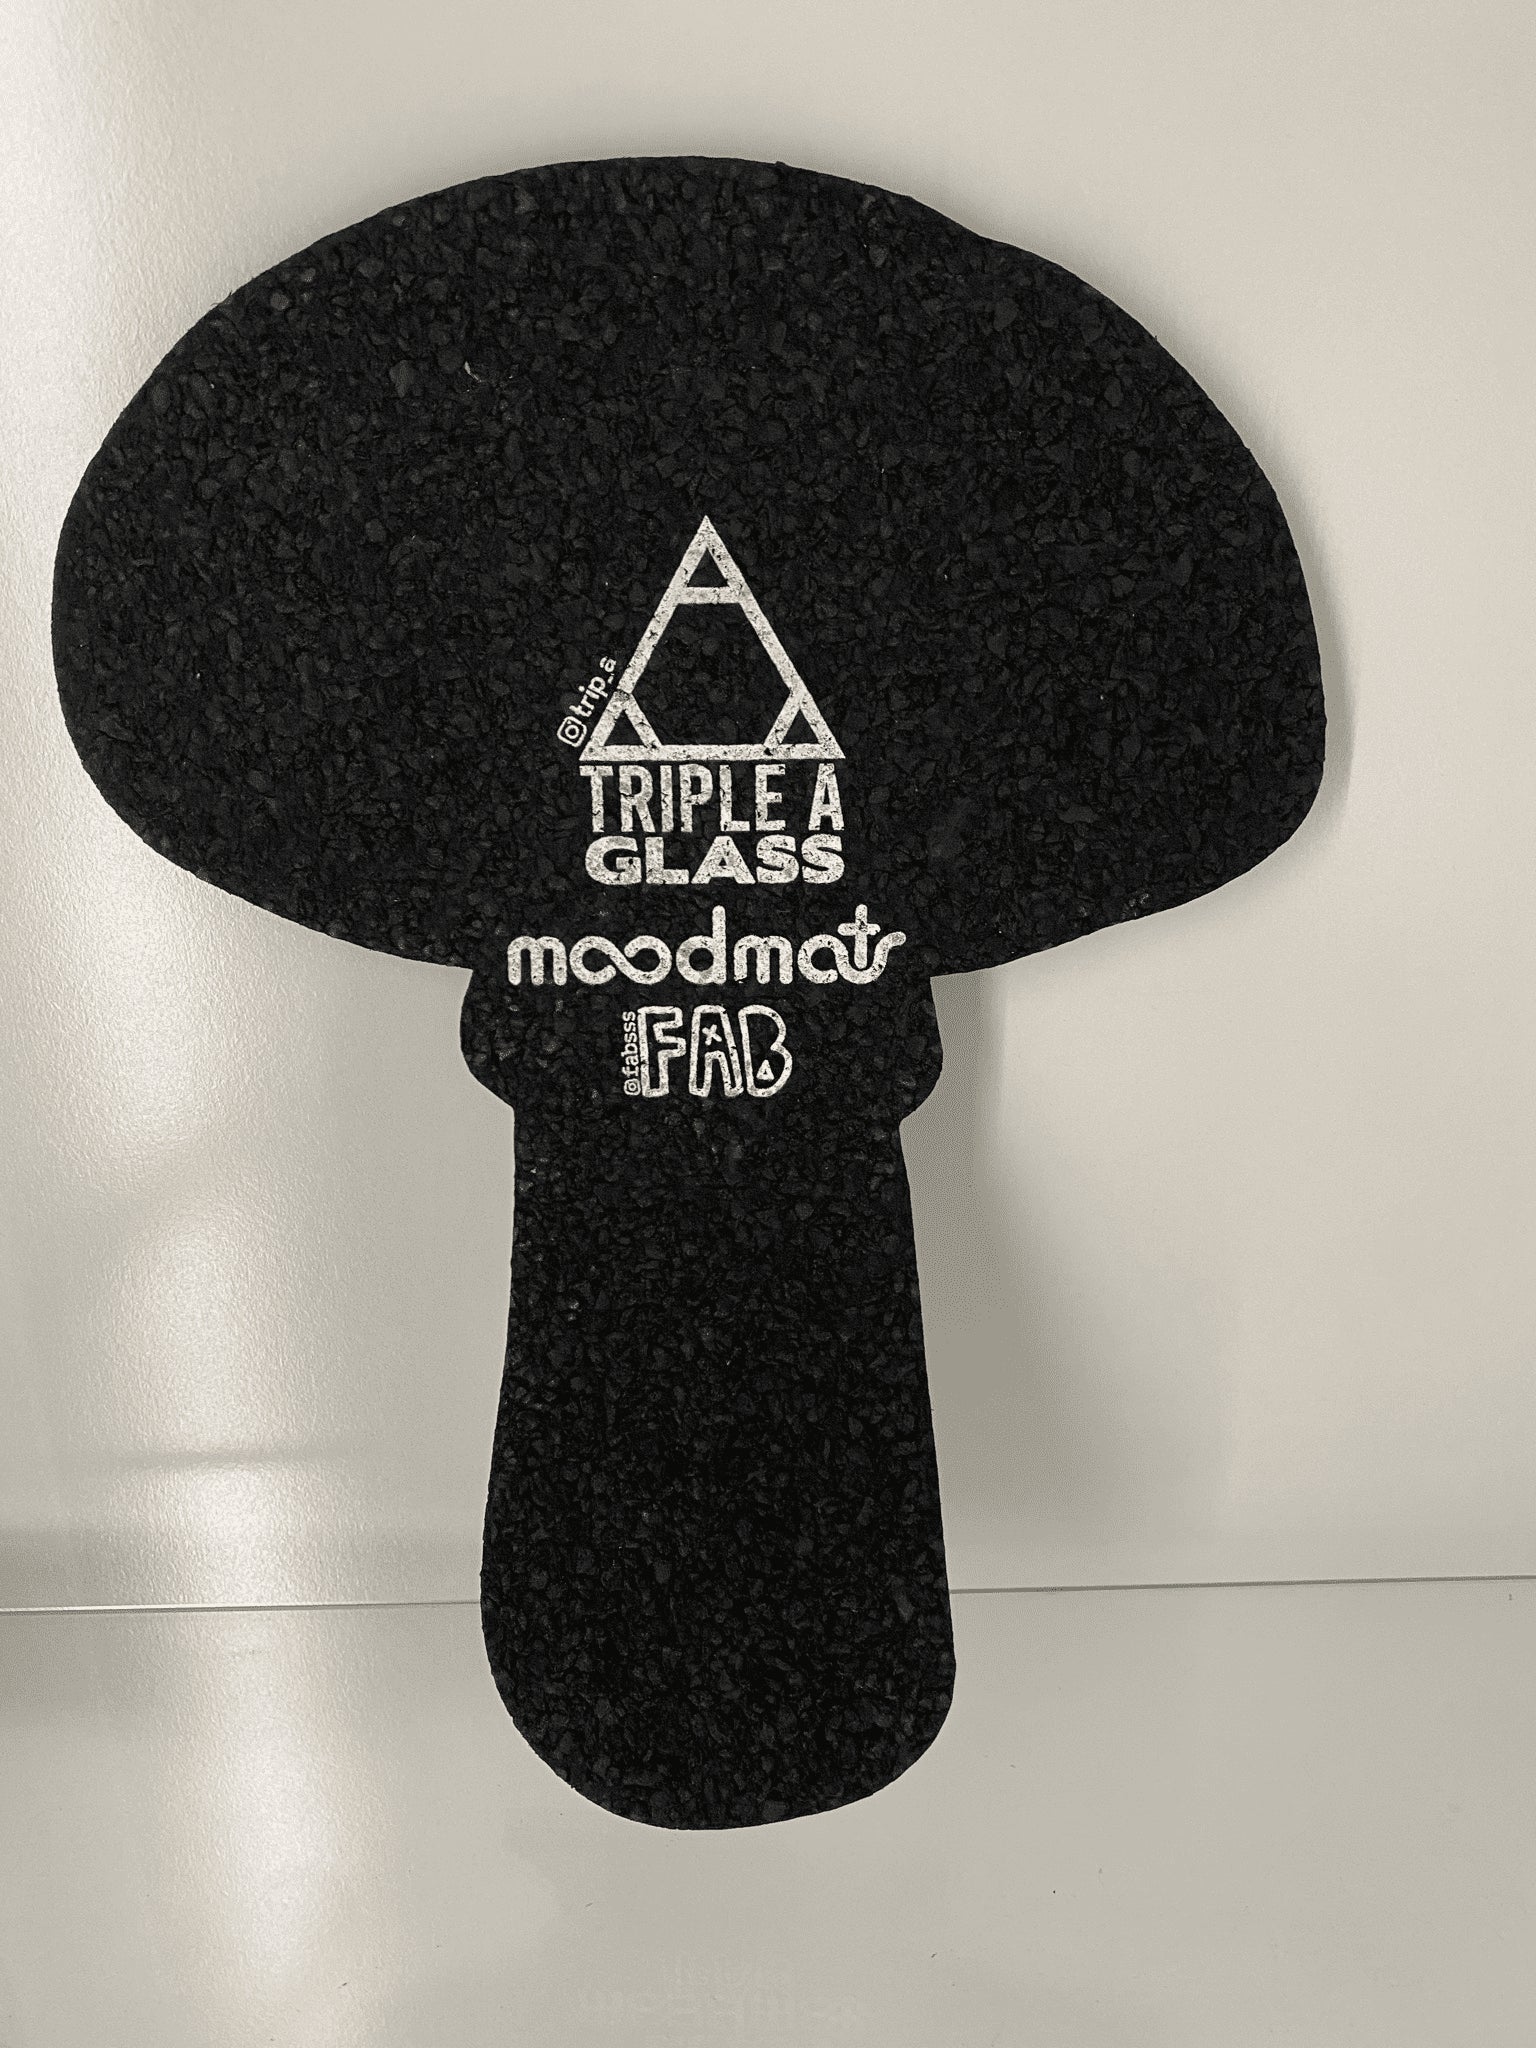 meticulously crafted art piece - Mushroom Moodmat by Trip A x Fabsss